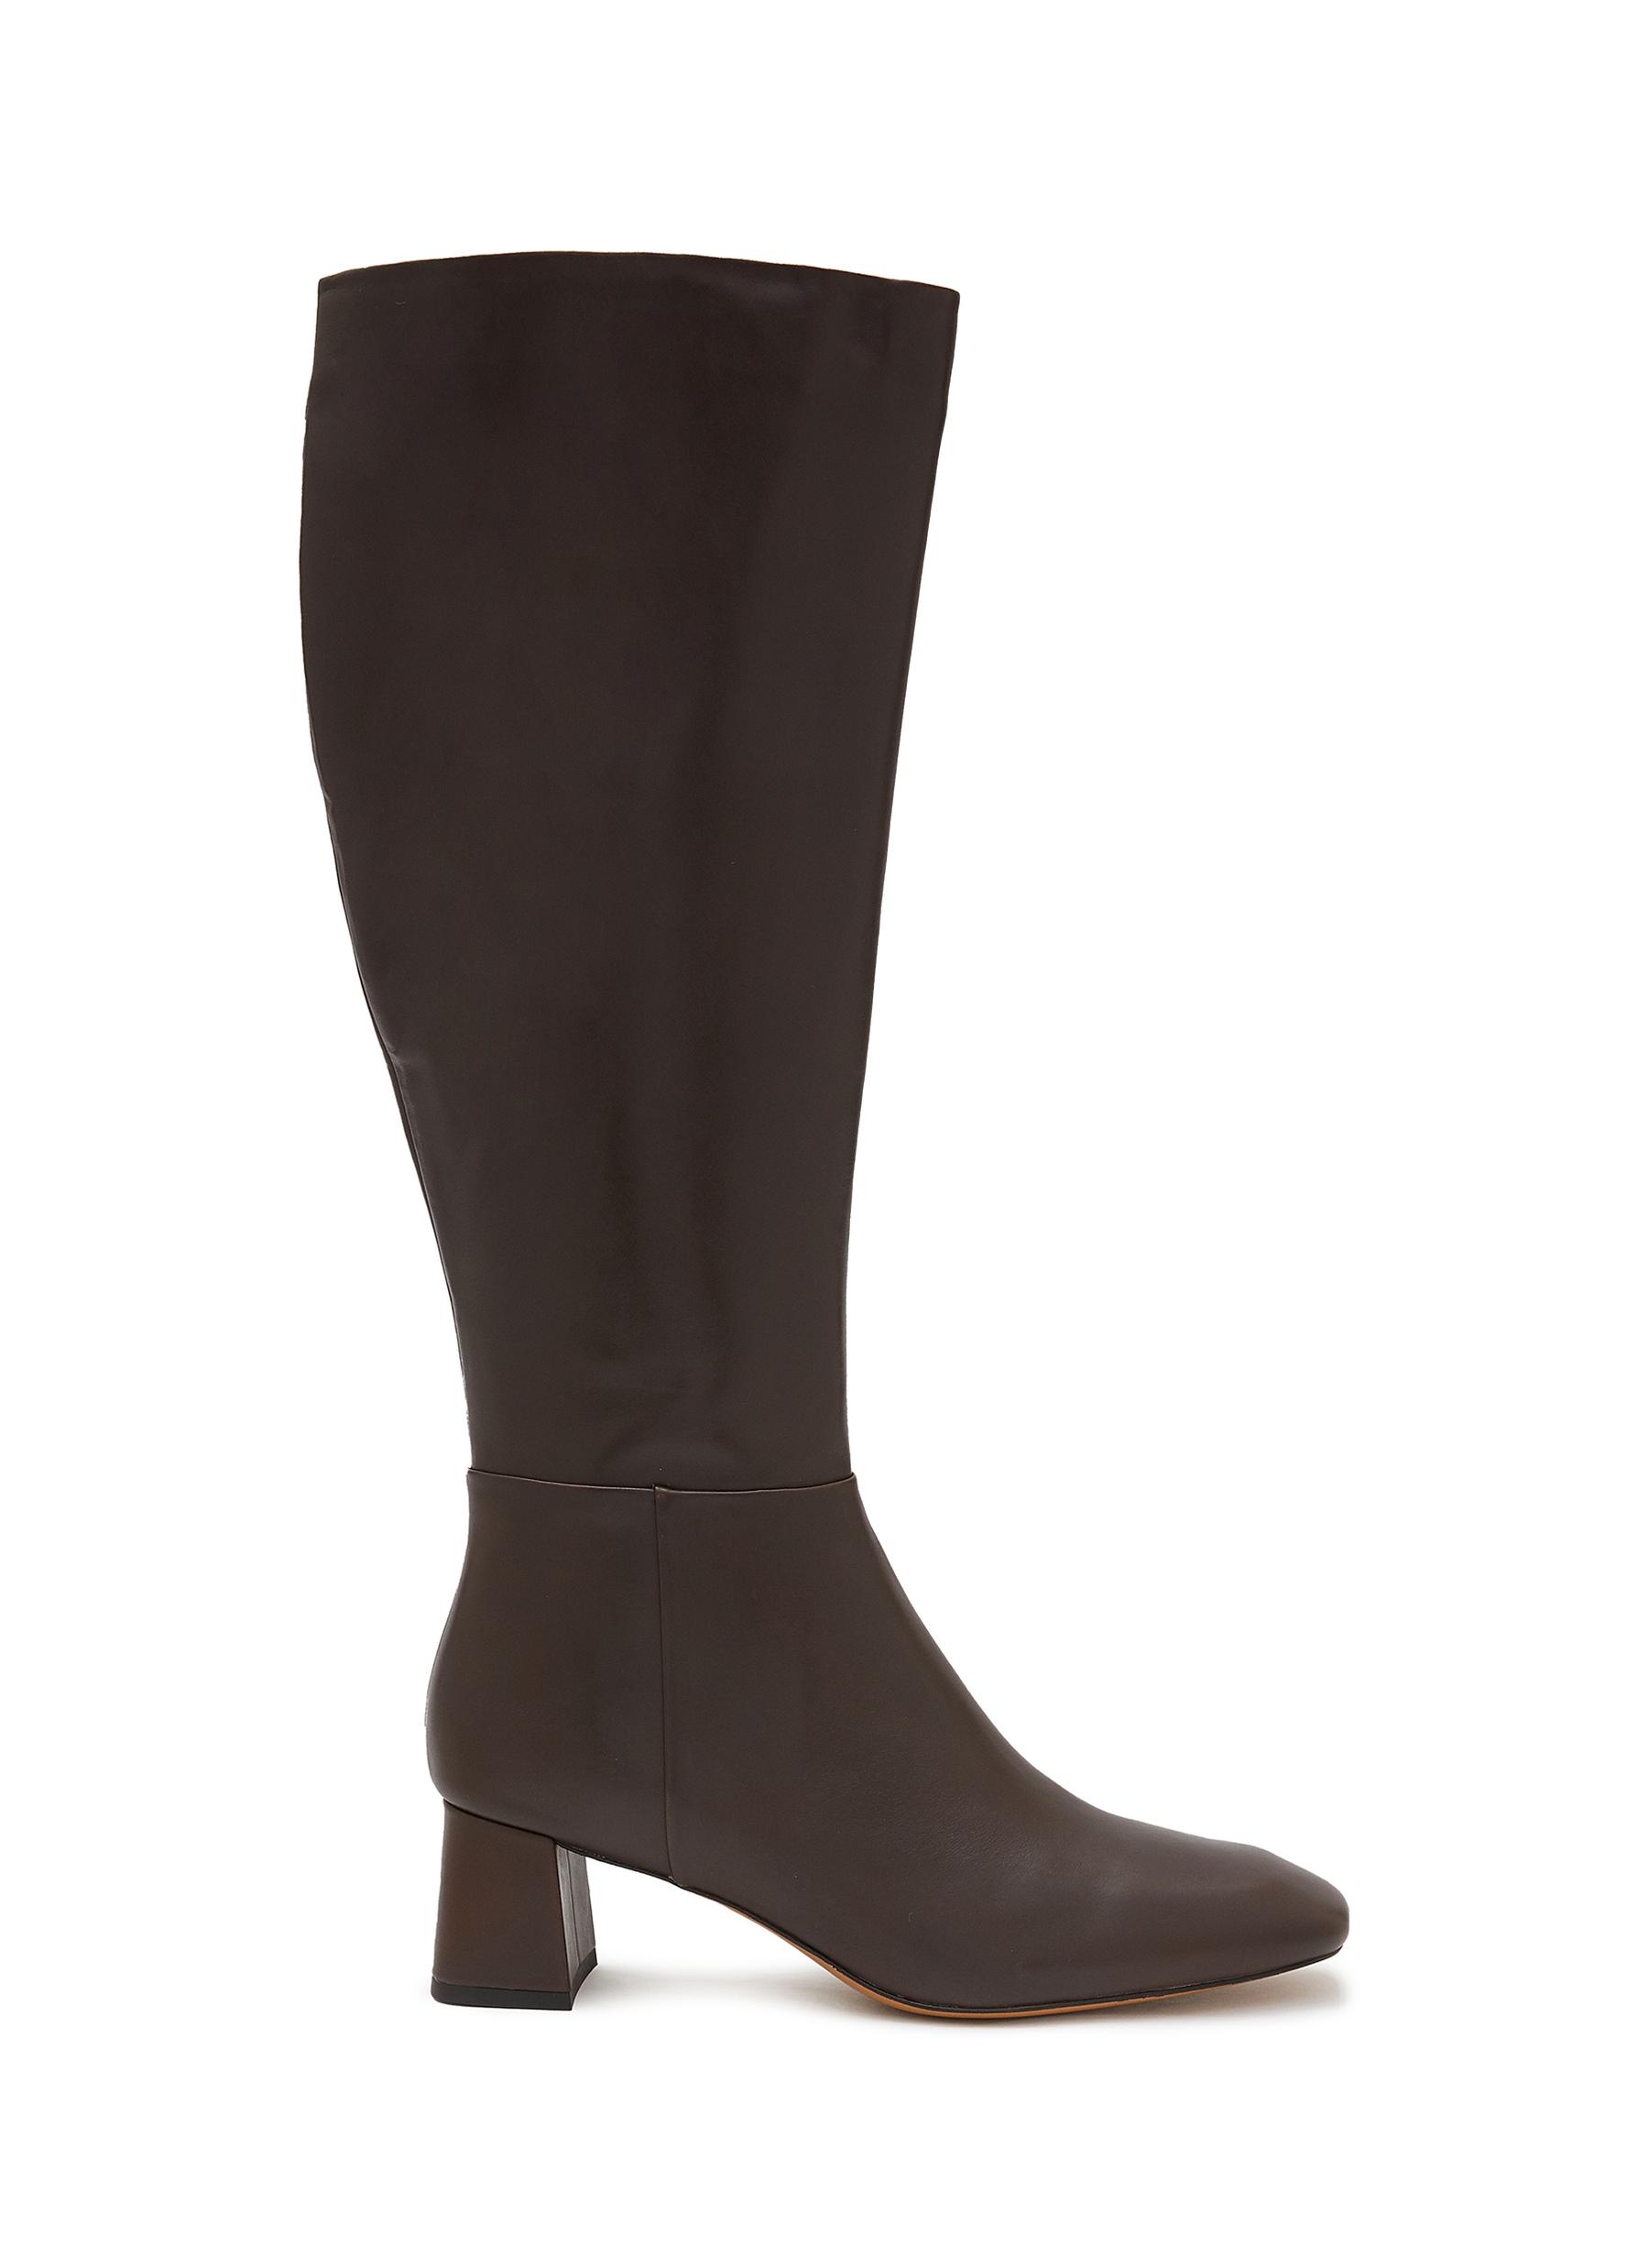 EQUIL ‘Prague' 45 Leather Heeled Tall Boots